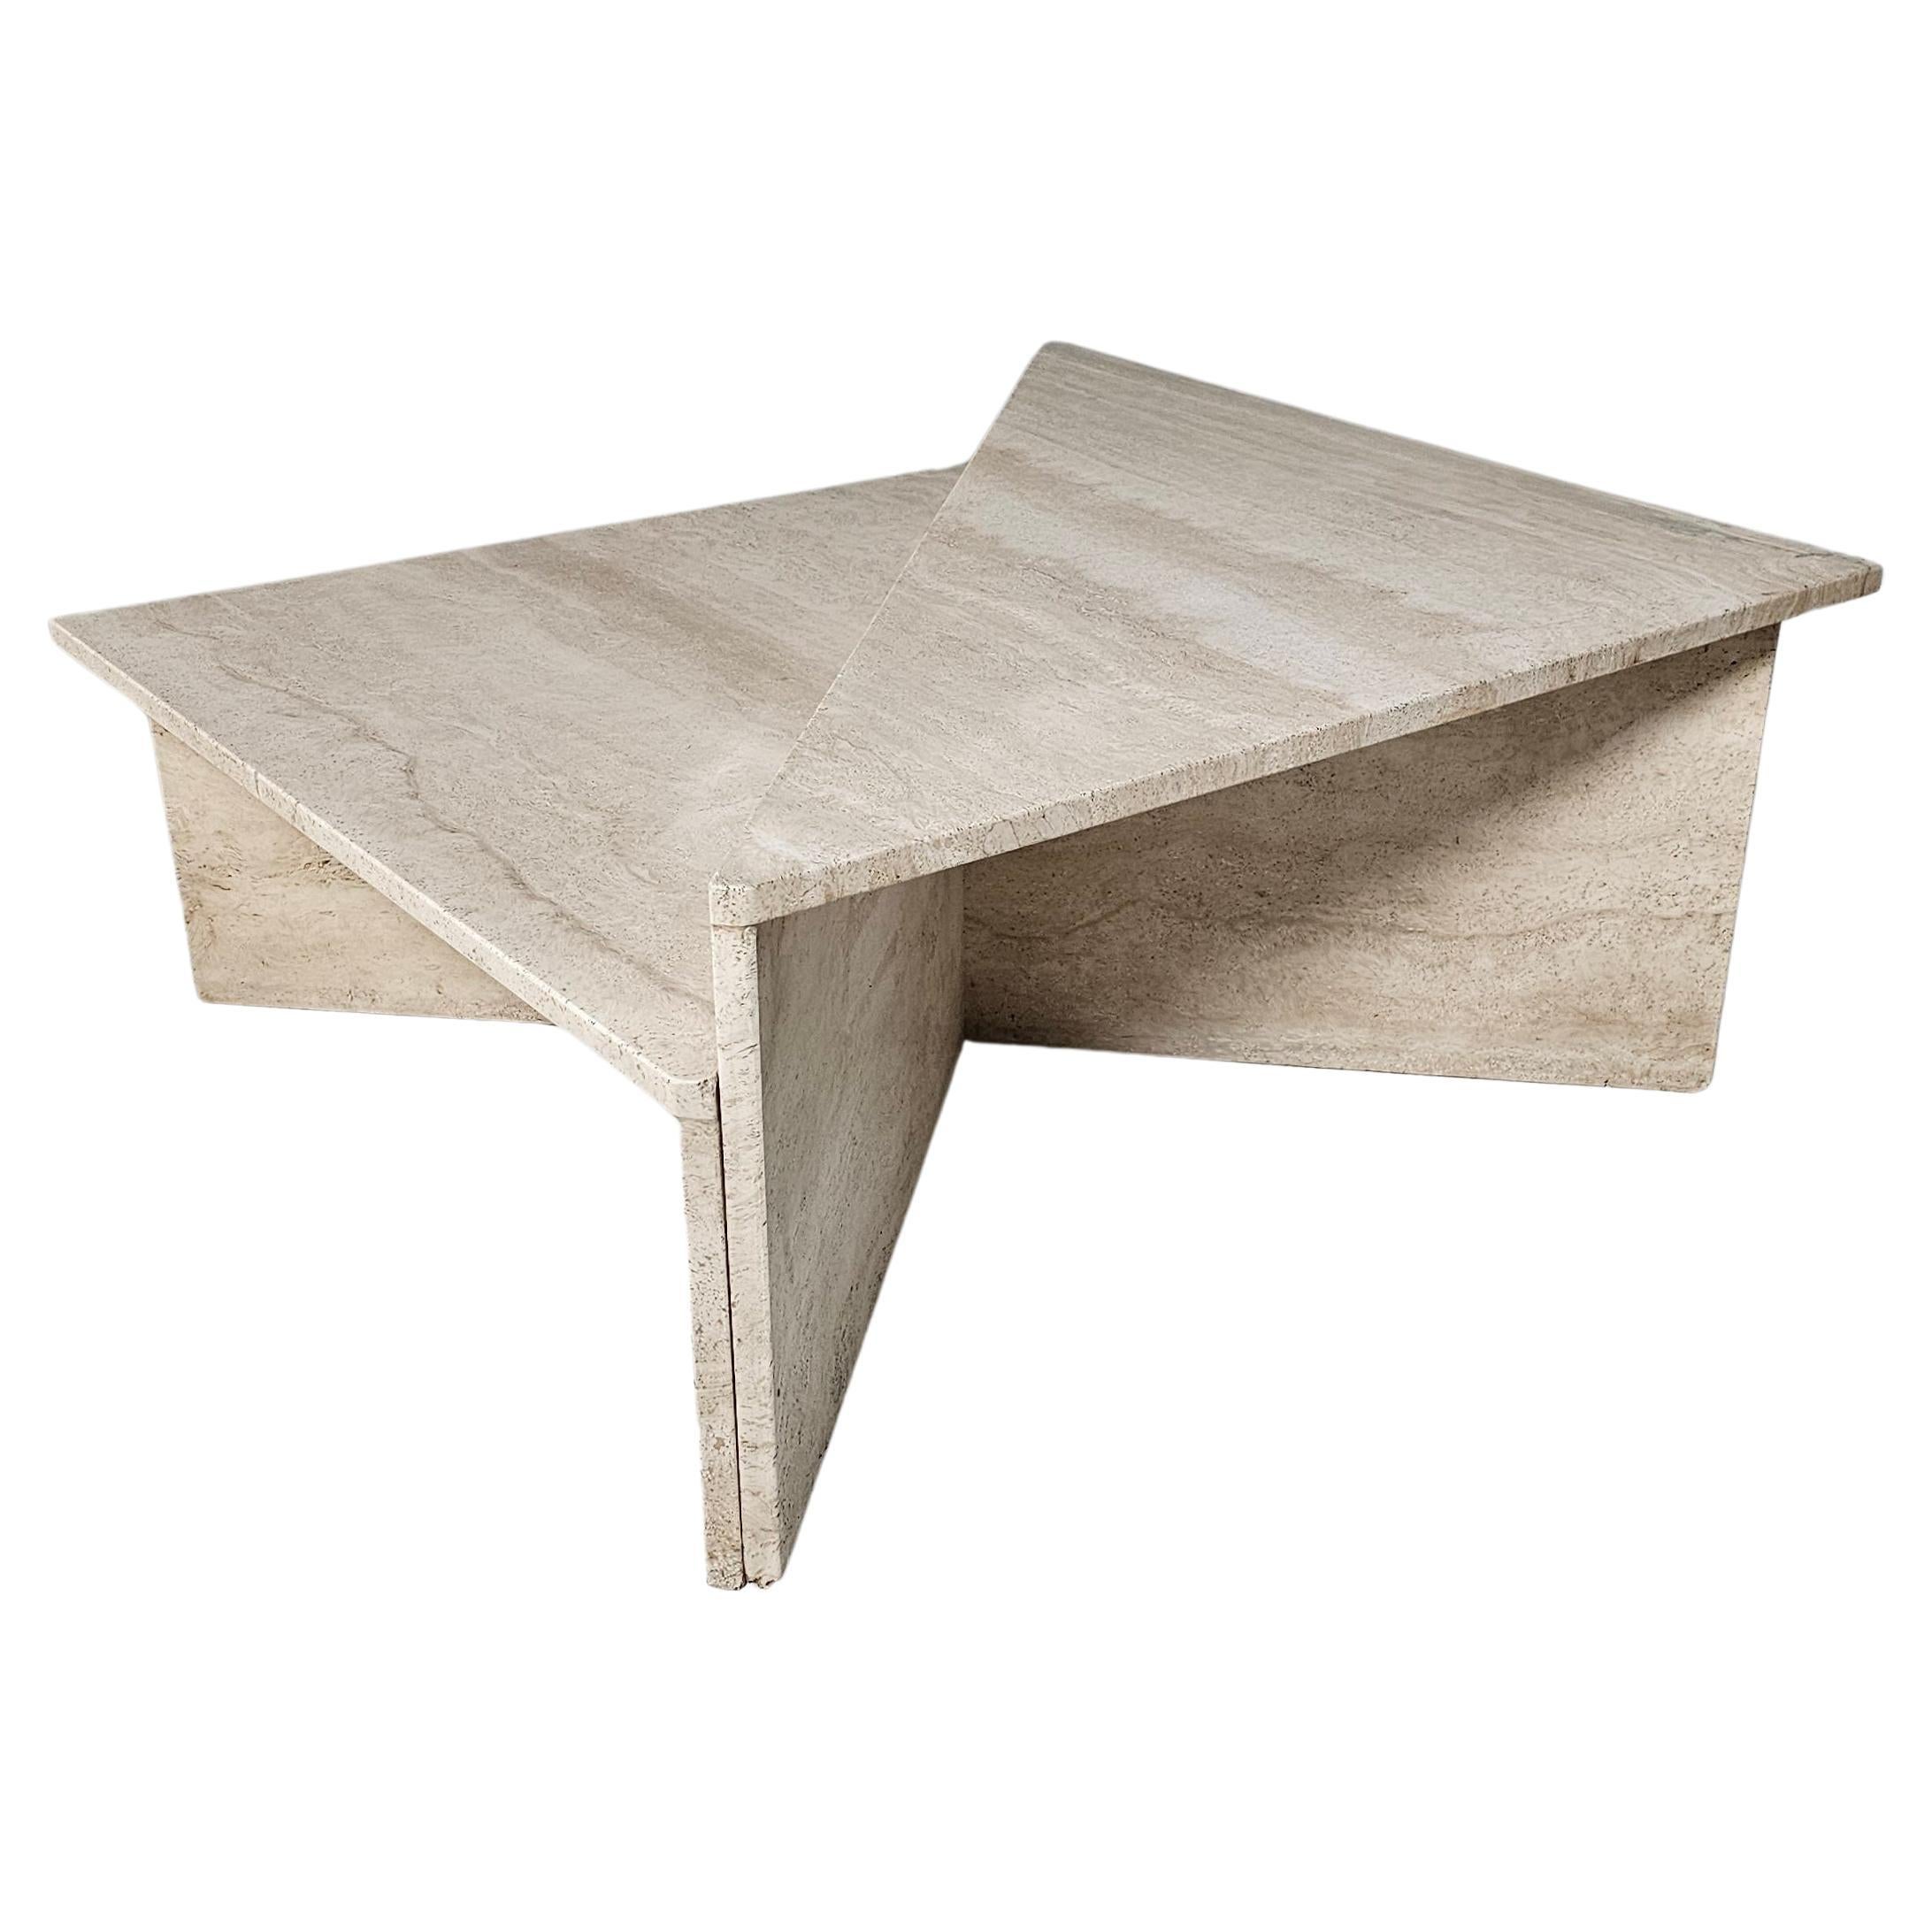 Two Part Travertine Modular Coffee Table by Up & Up, circa 1970s For Sale